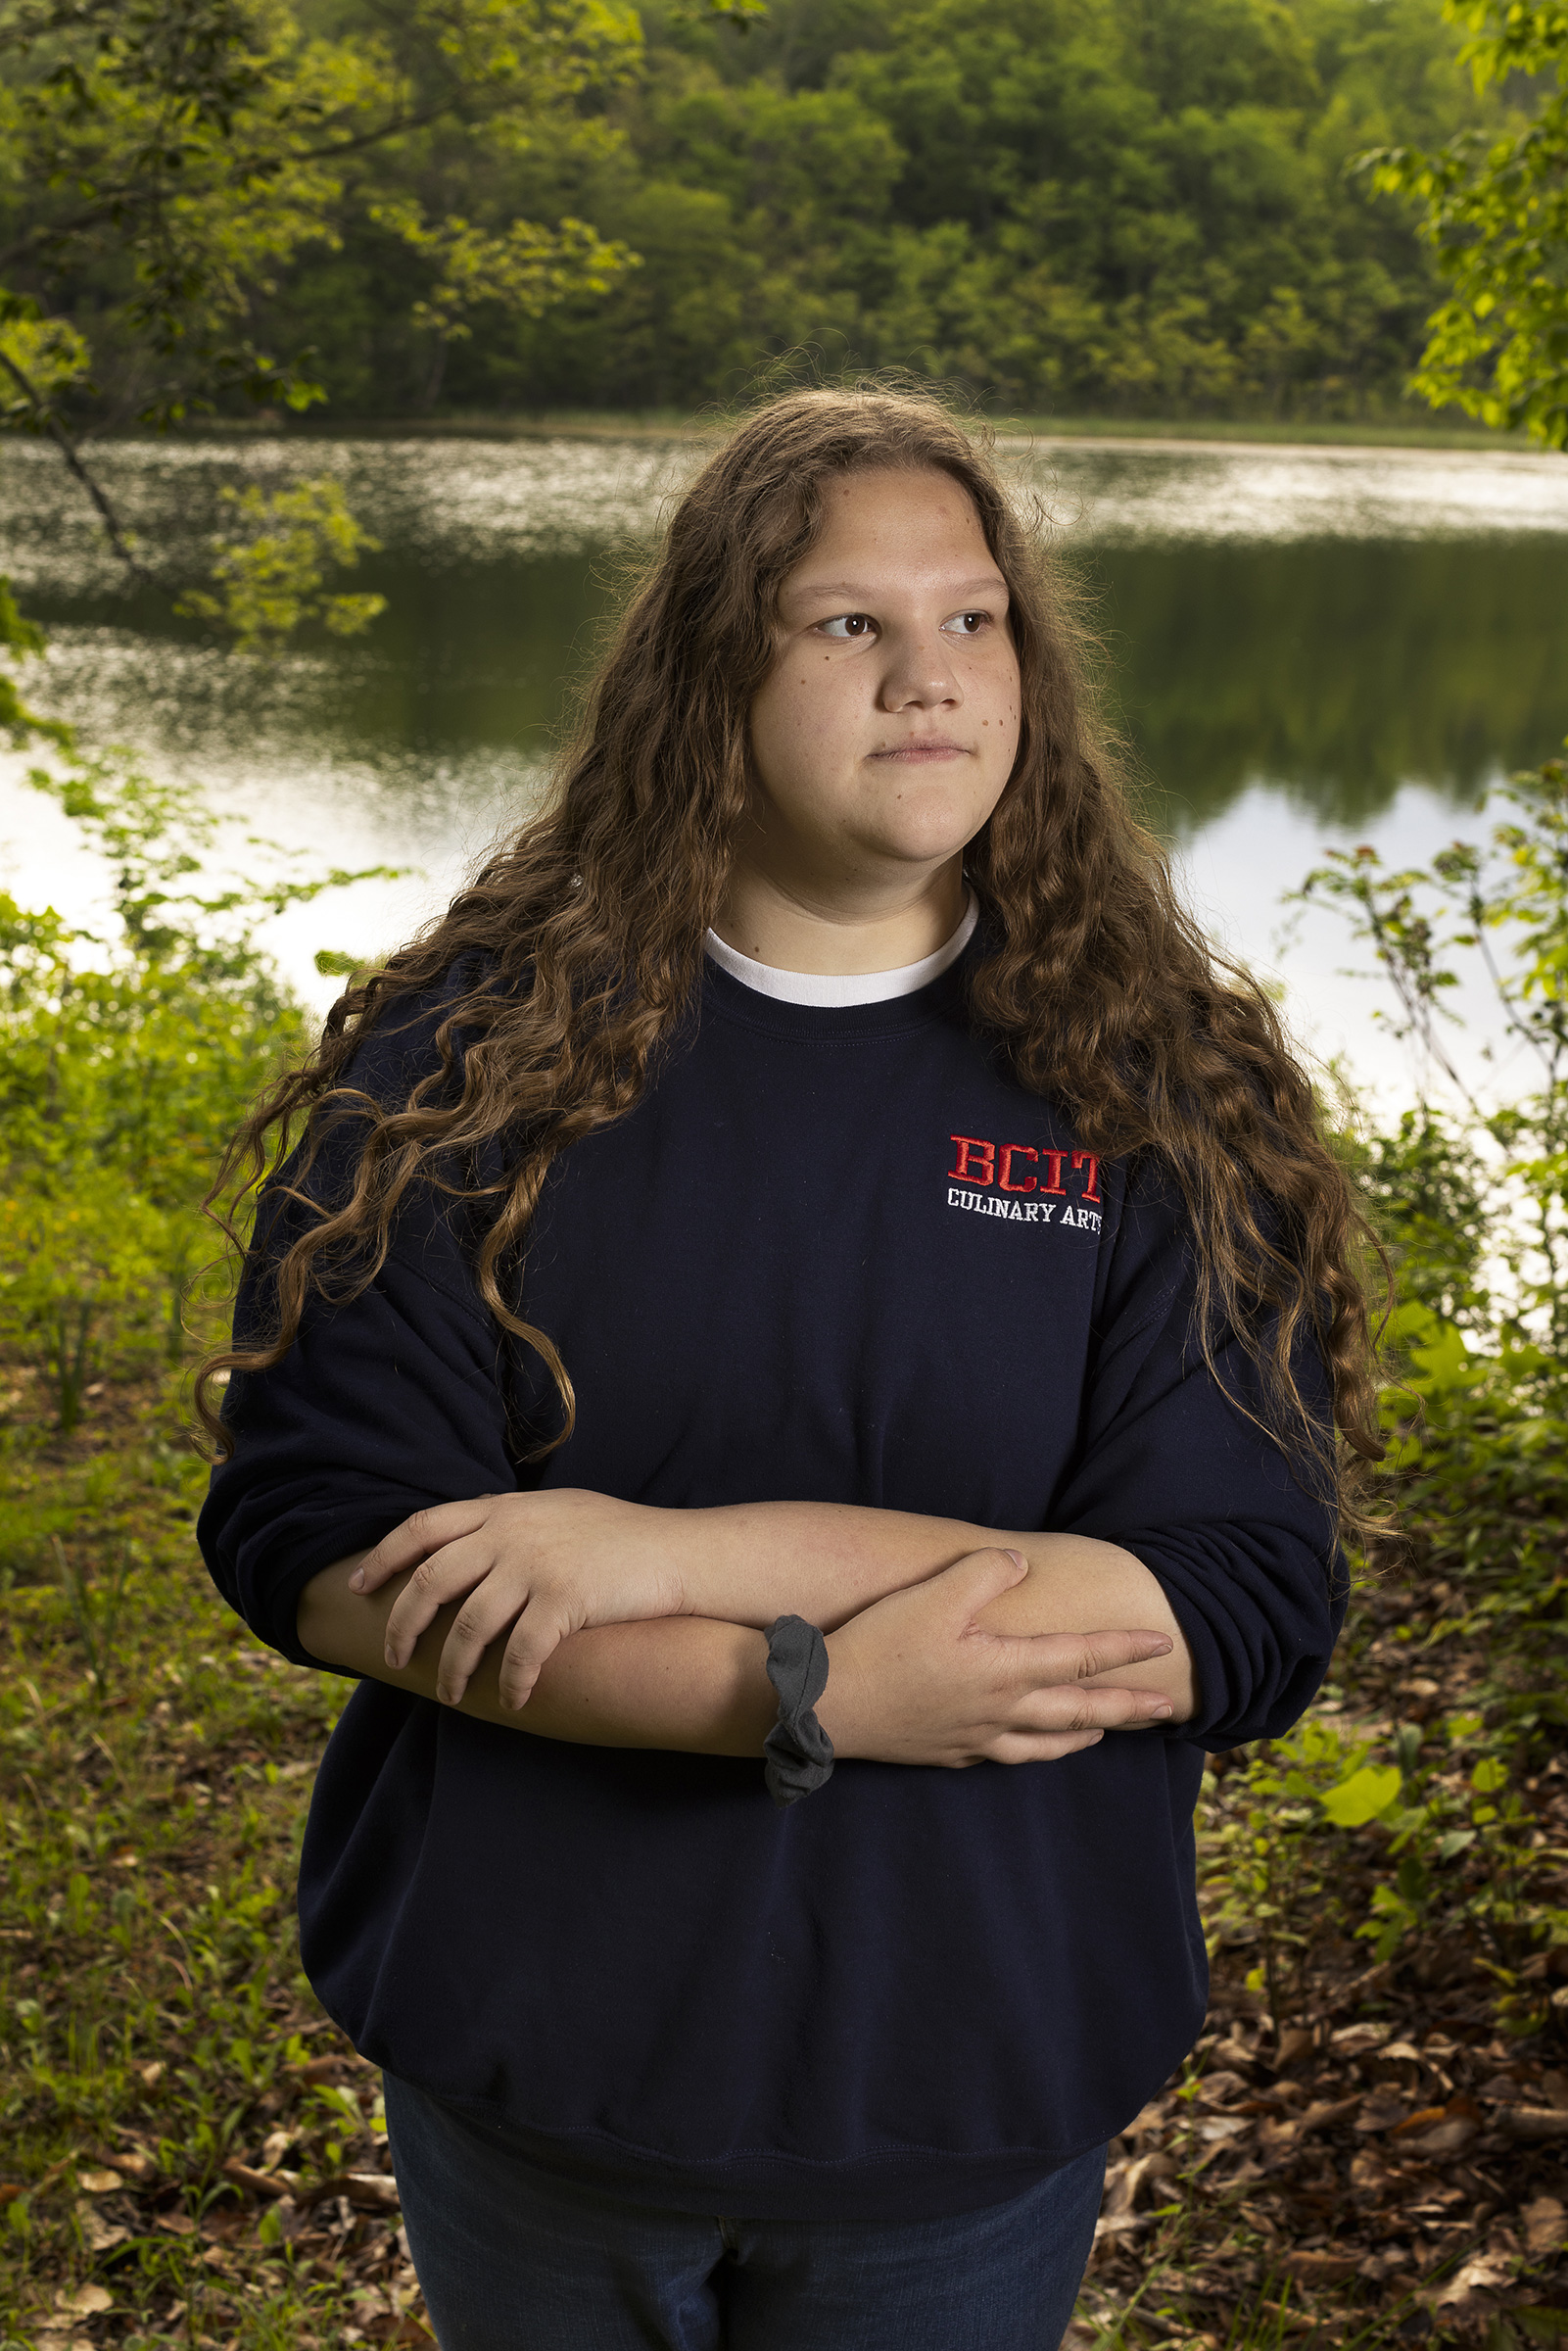 “They not only helped me find coping mechanisms and skills, they gave me people to talk to who were like me and were my age. And it really just helped put things into perspective. It was game changing,  says camper Addison Aquilino.